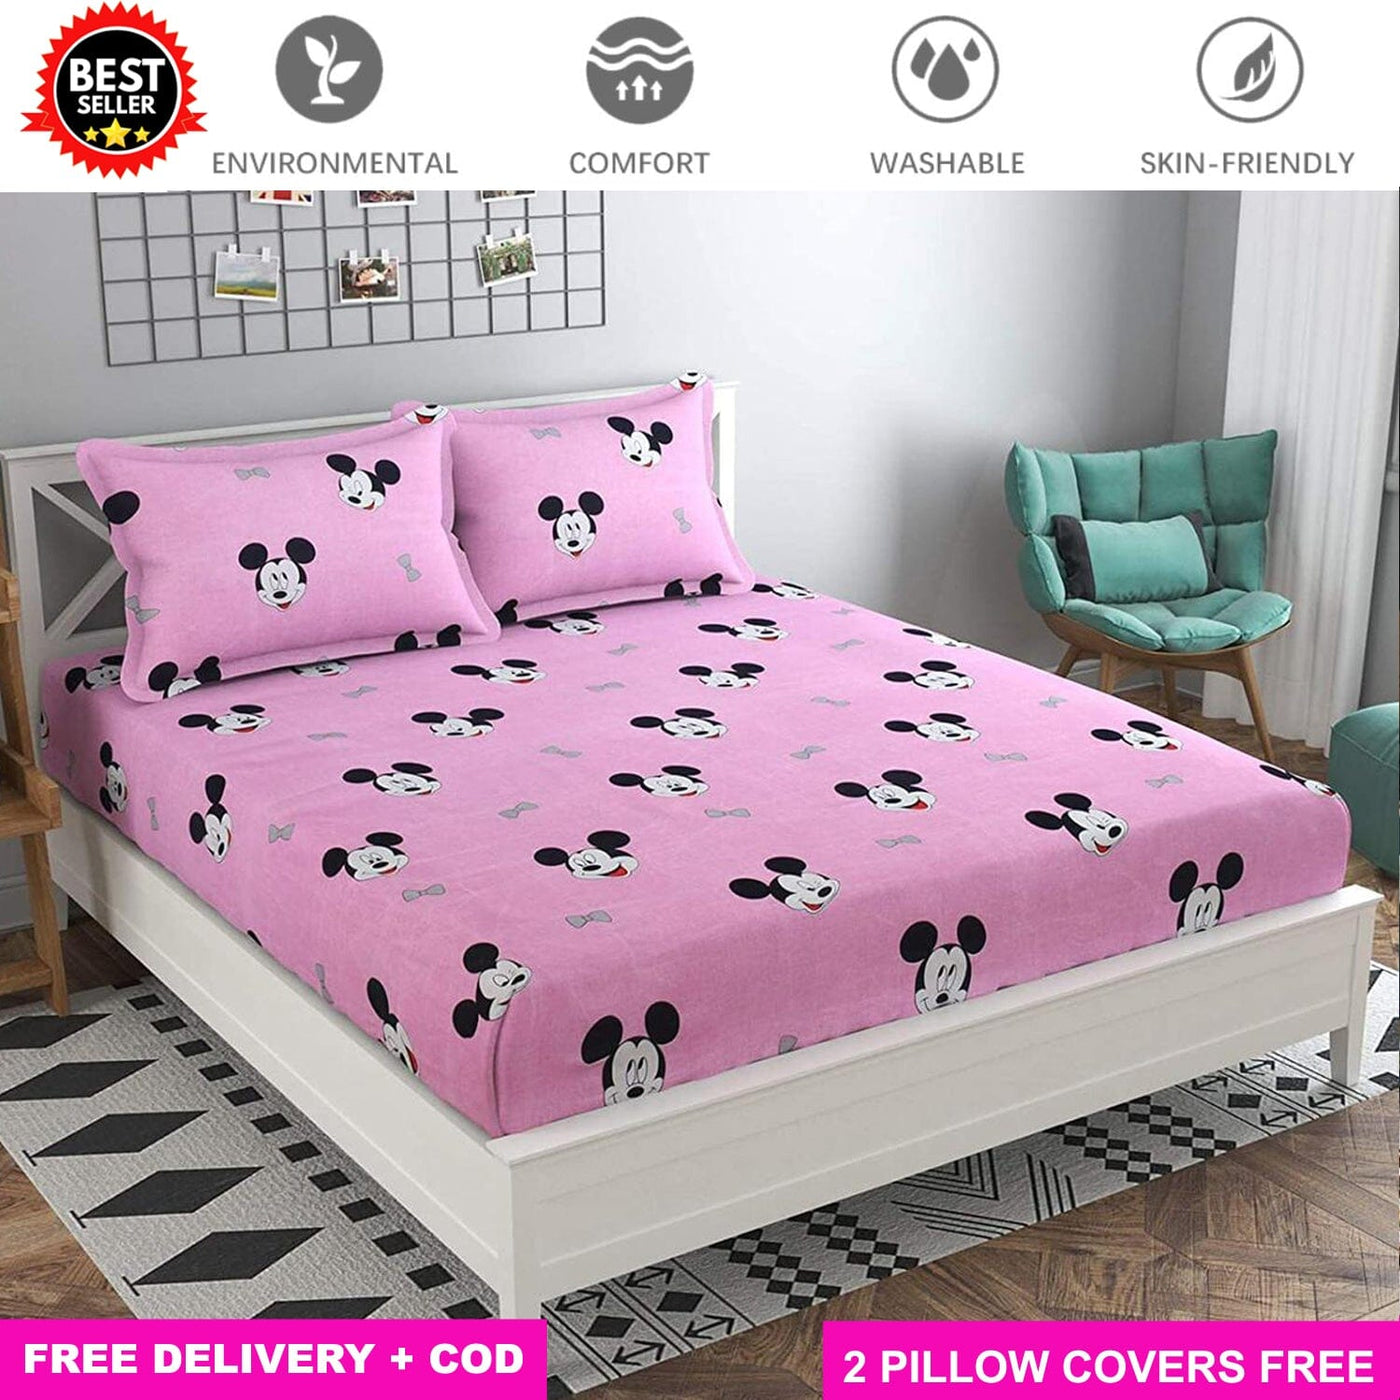 Kids Special Full Elastic Fitted Bedsheet with 2 Pillow Covers Bed Sheets Great Happy IN KING SIZE - ₹1299 